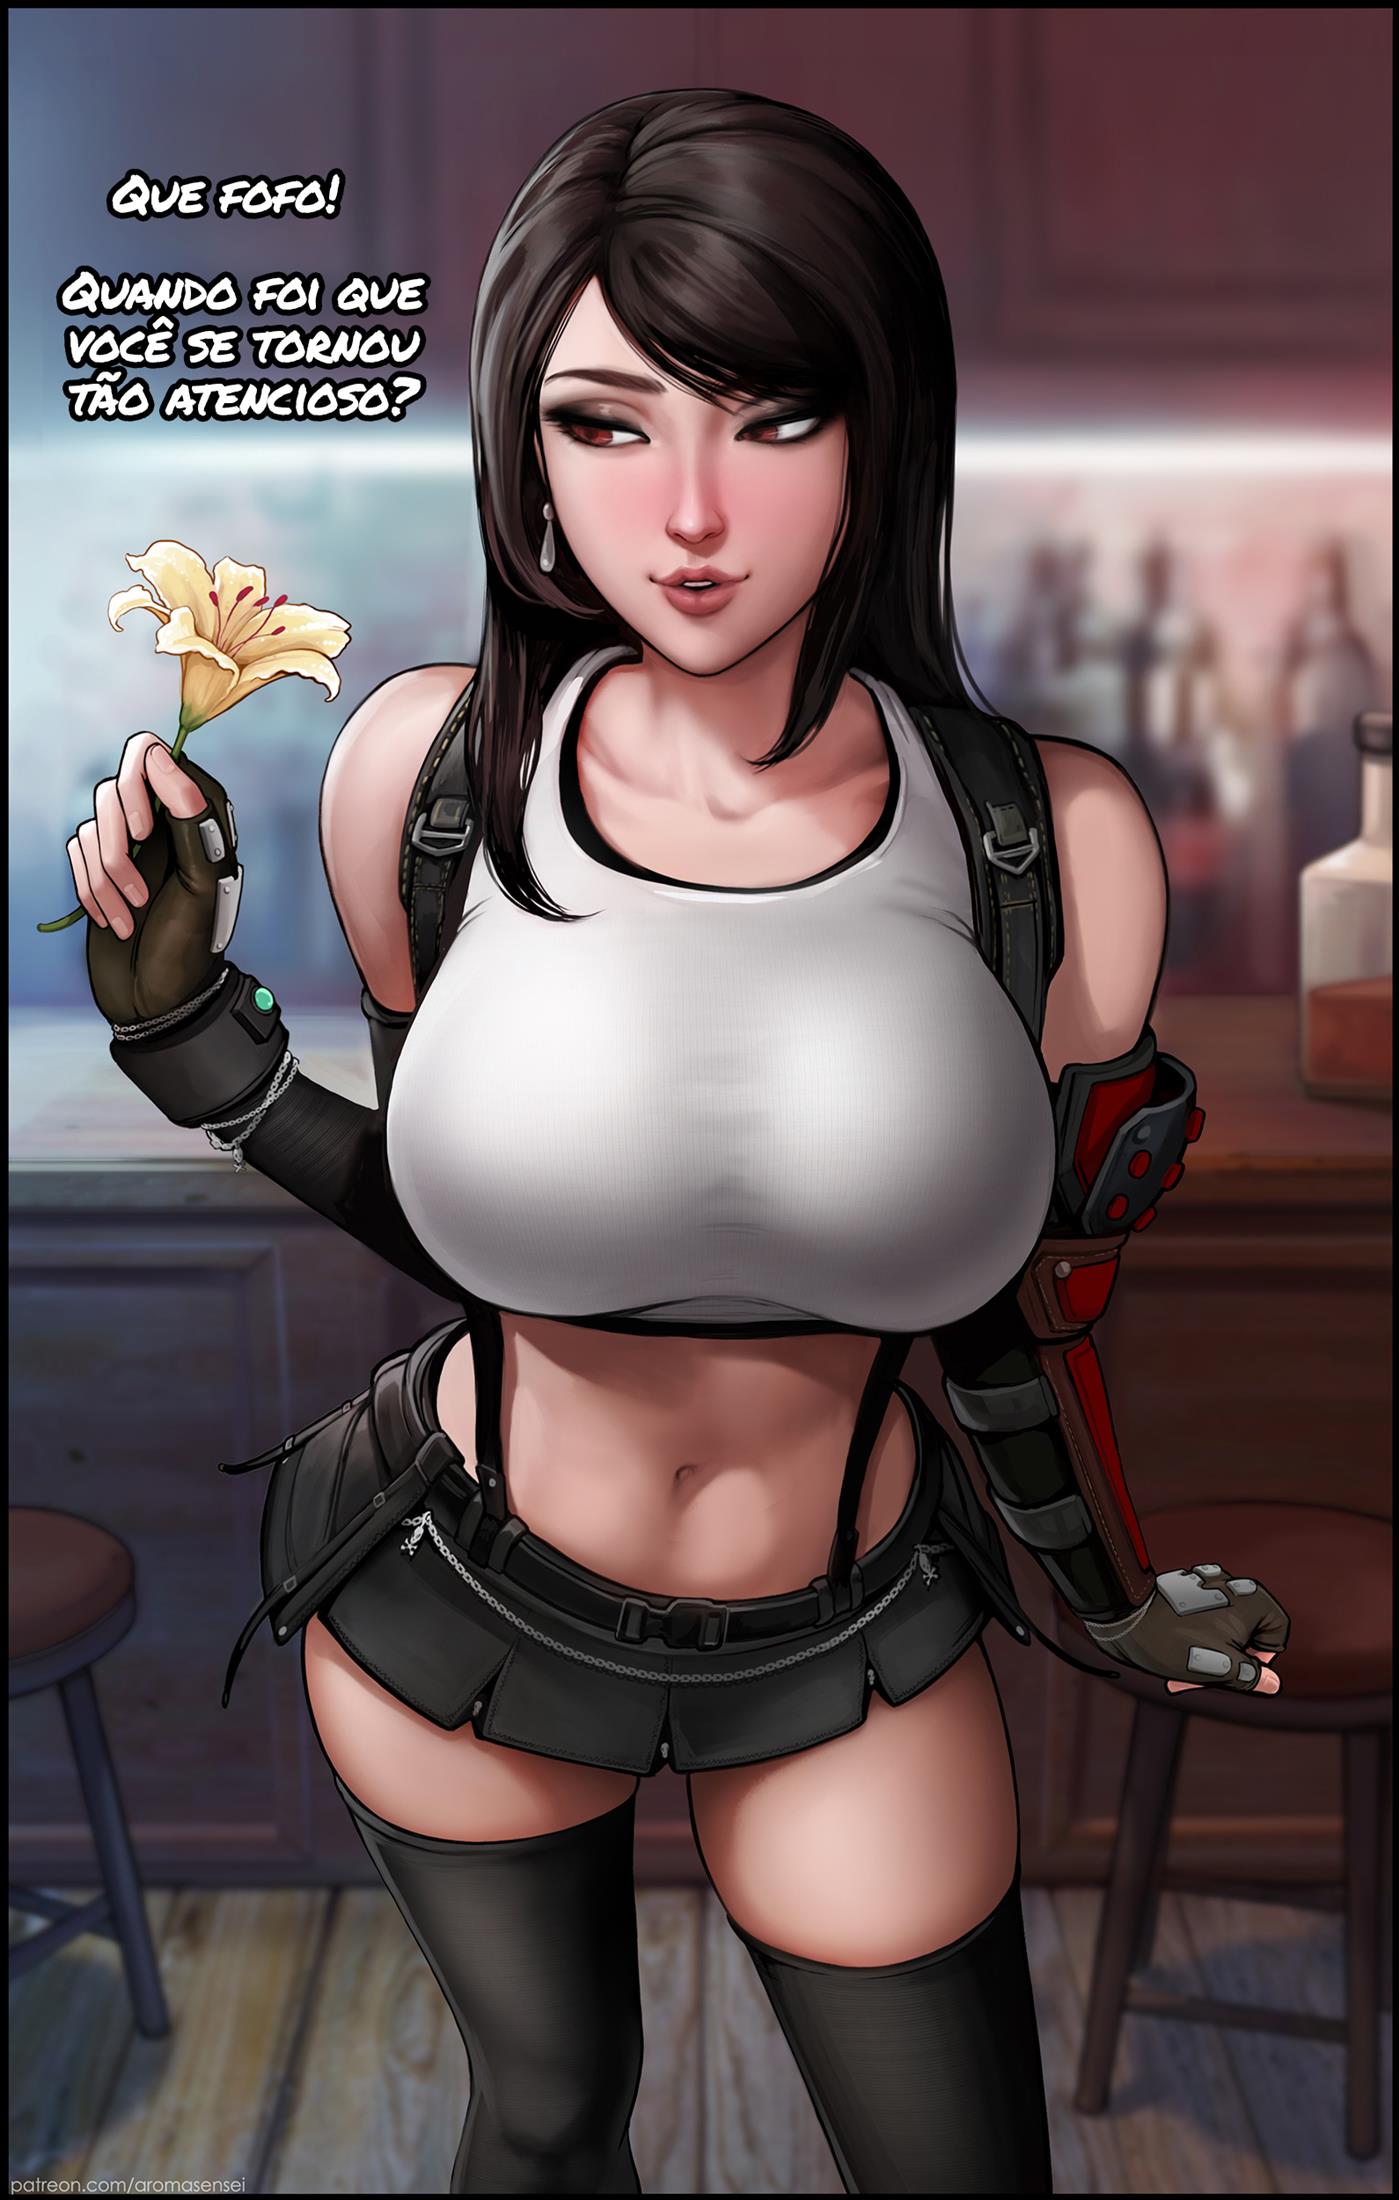 Tifa... its for you!